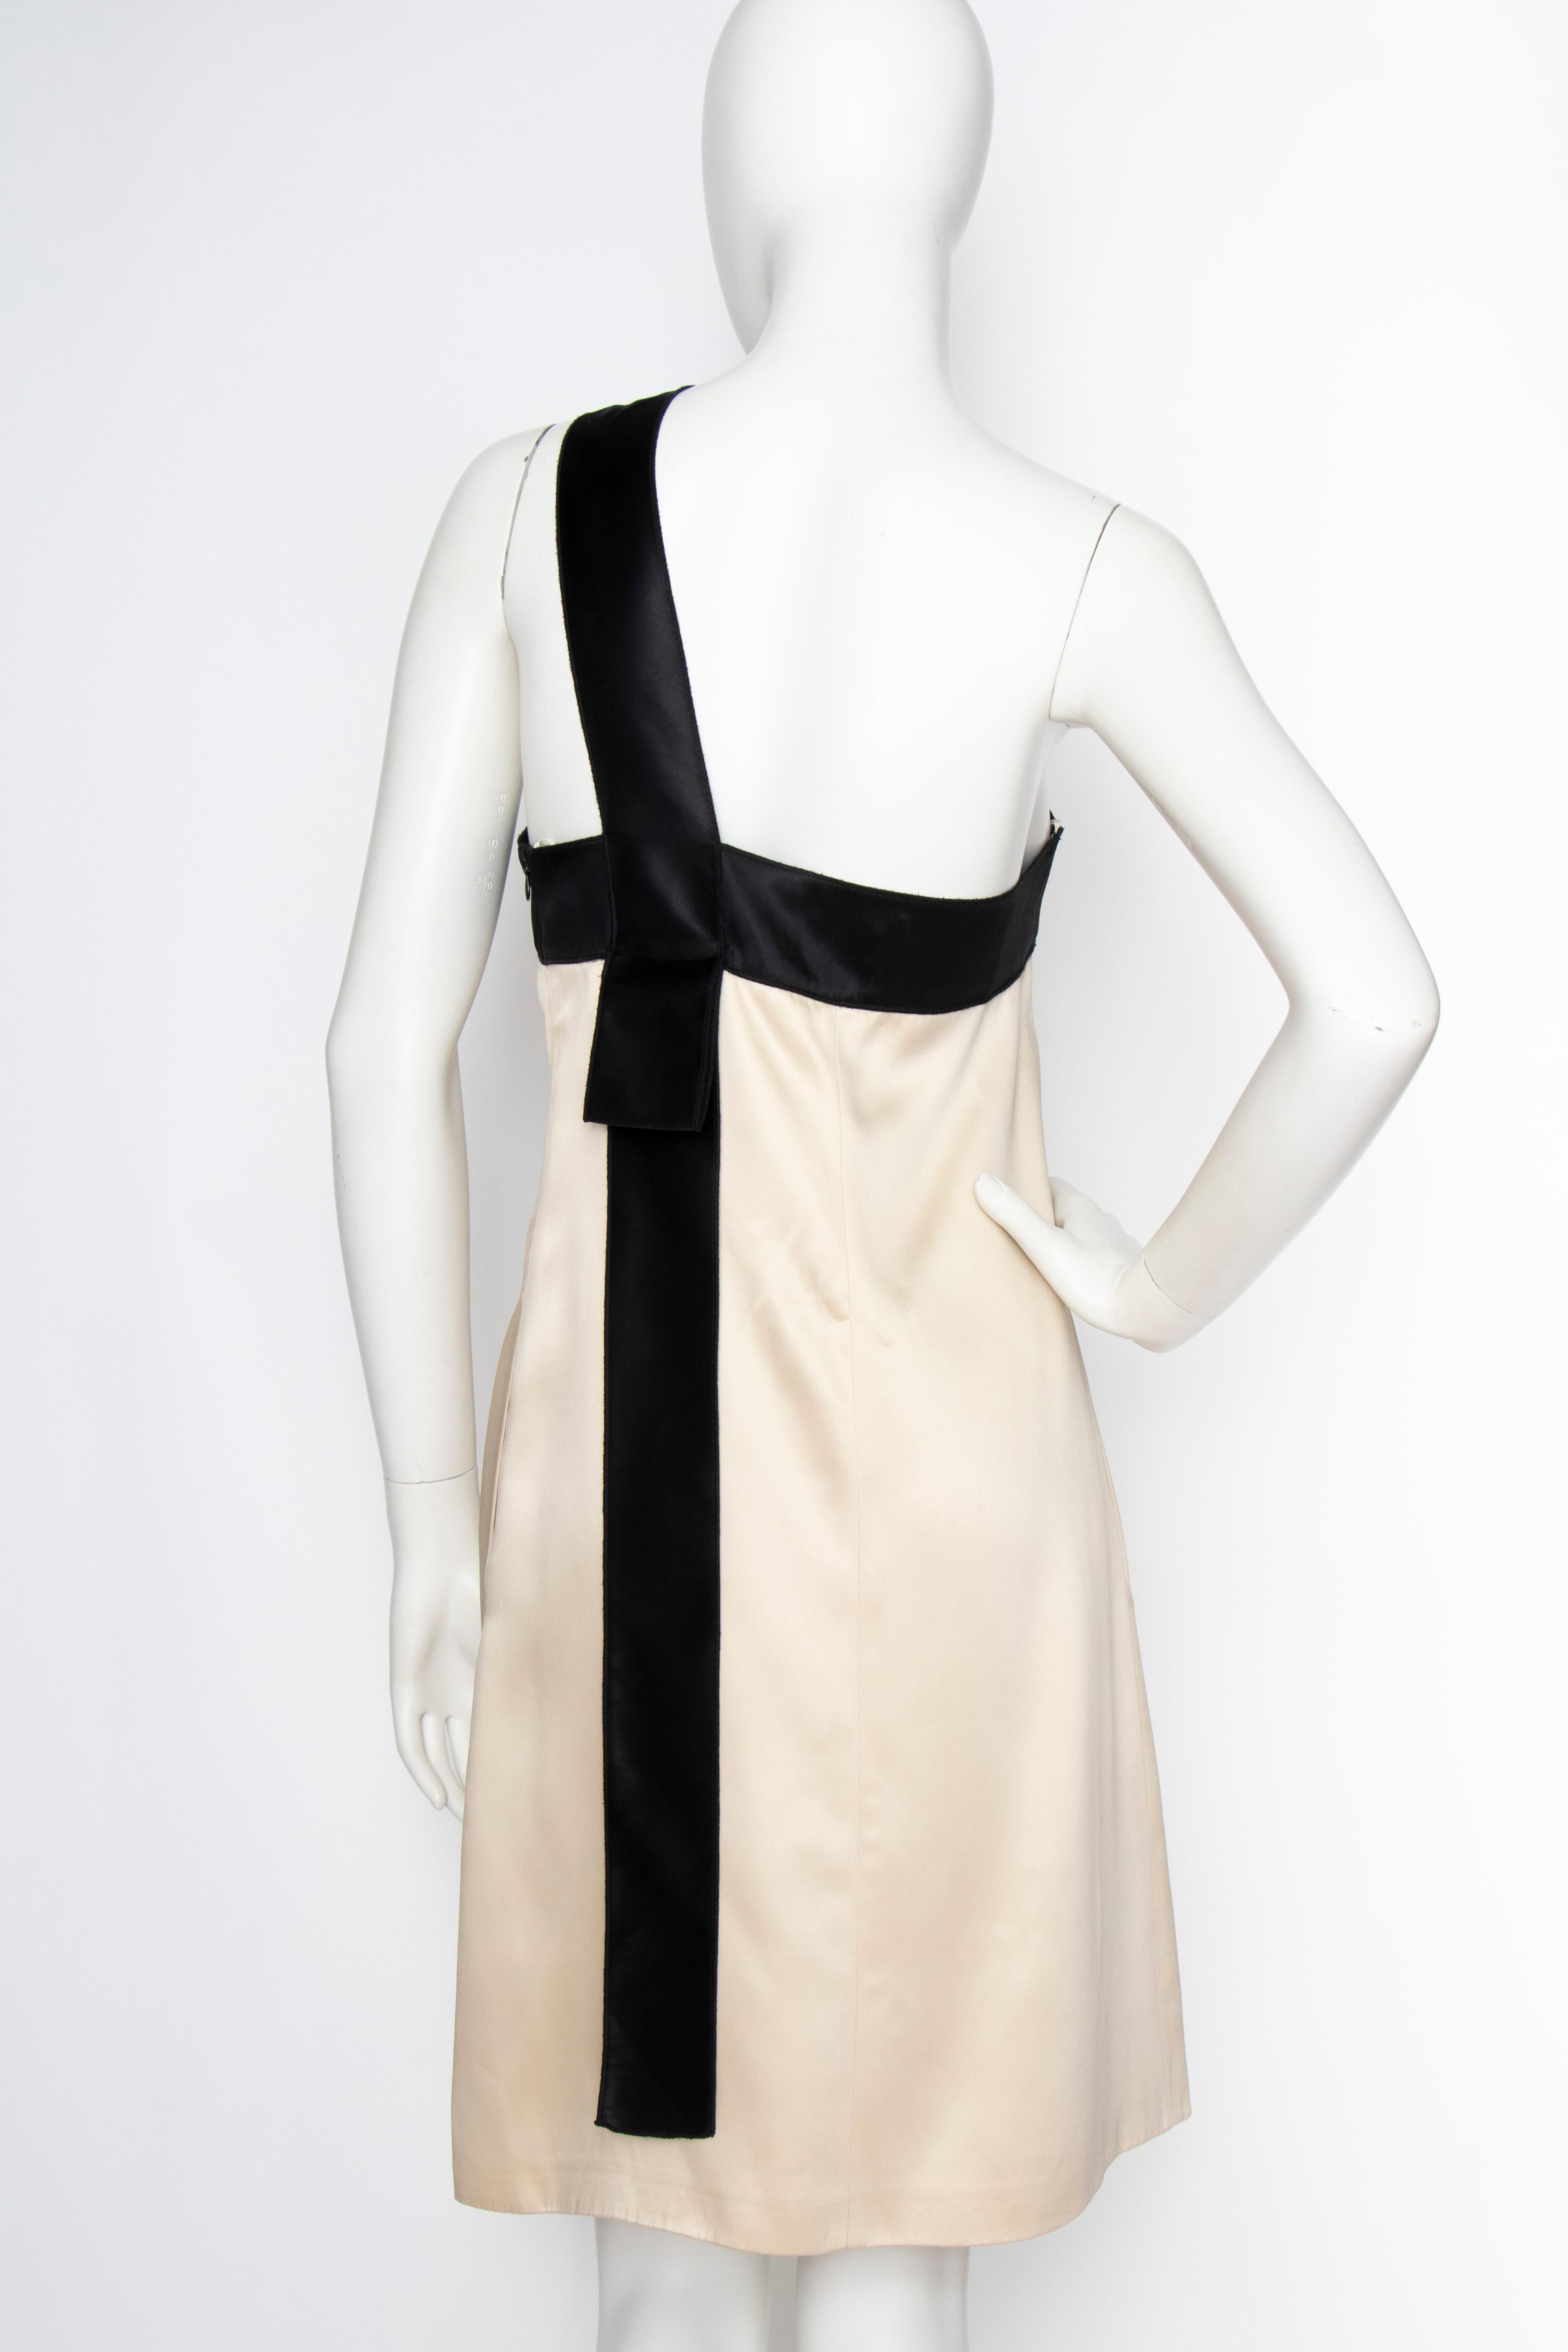 An Early 2000s Vintage D&G by Dolce & Gabbana Ivory Satin Cocktail Dress In Good Condition For Sale In Copenhagen, DK